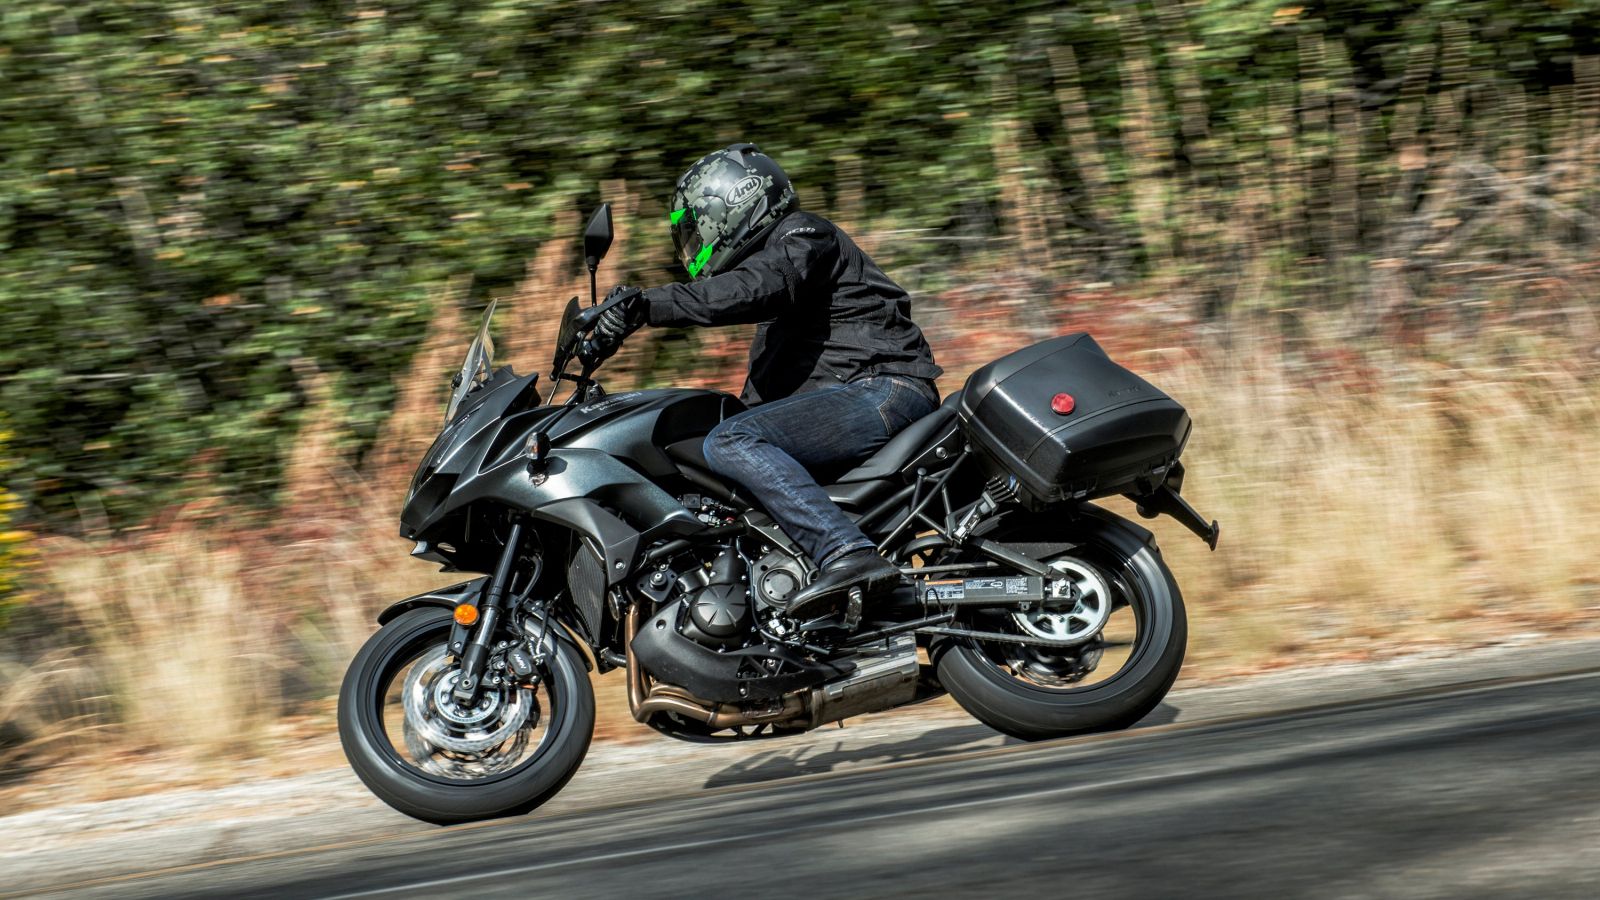 2015 - 2019 Kawasaki Versys 650 LT leaning into a  curve